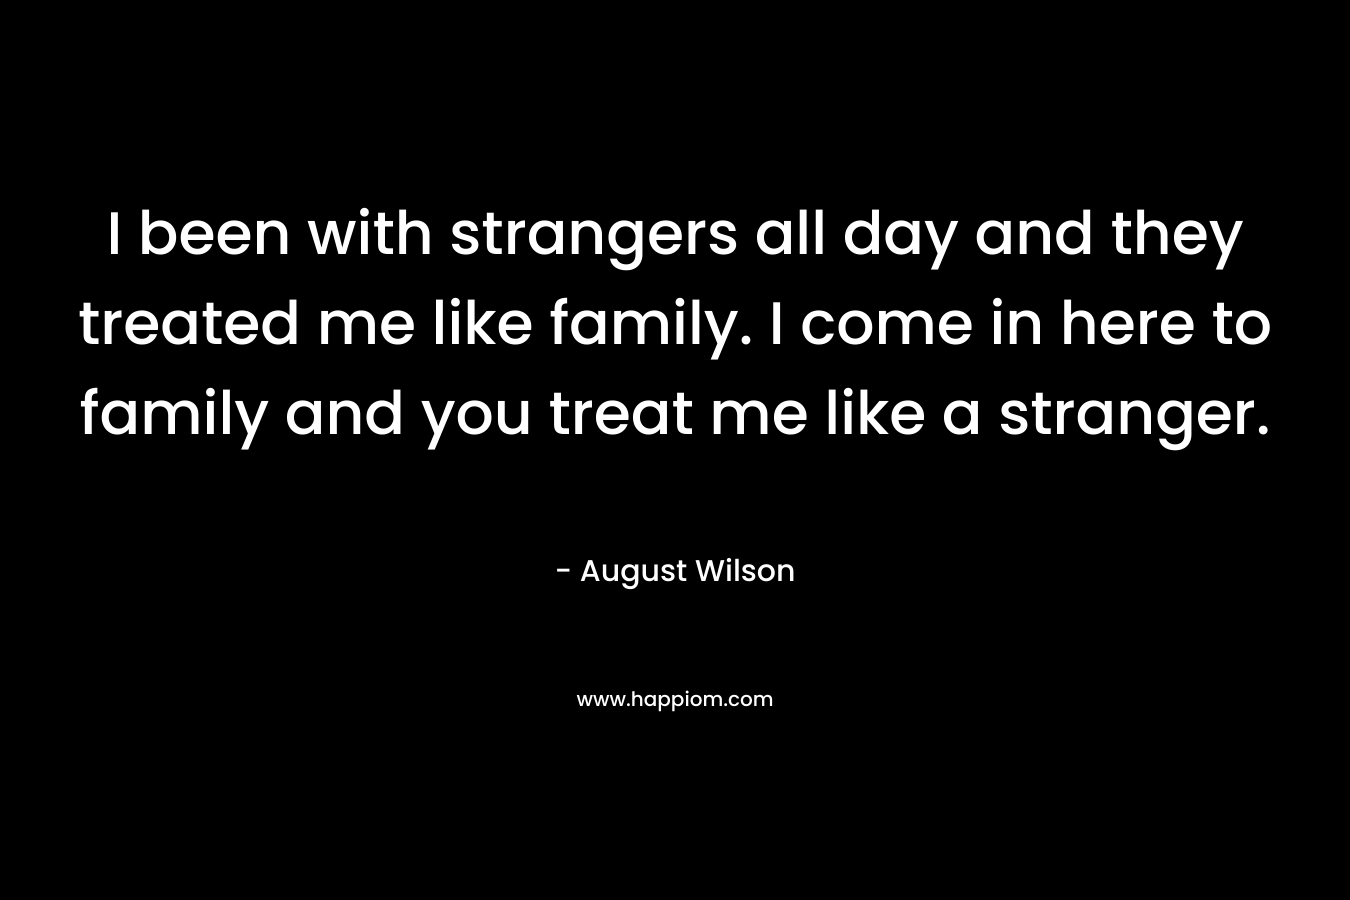 I been with strangers all day and they treated me like family. I come in here to family and you treat me like a stranger. – August Wilson